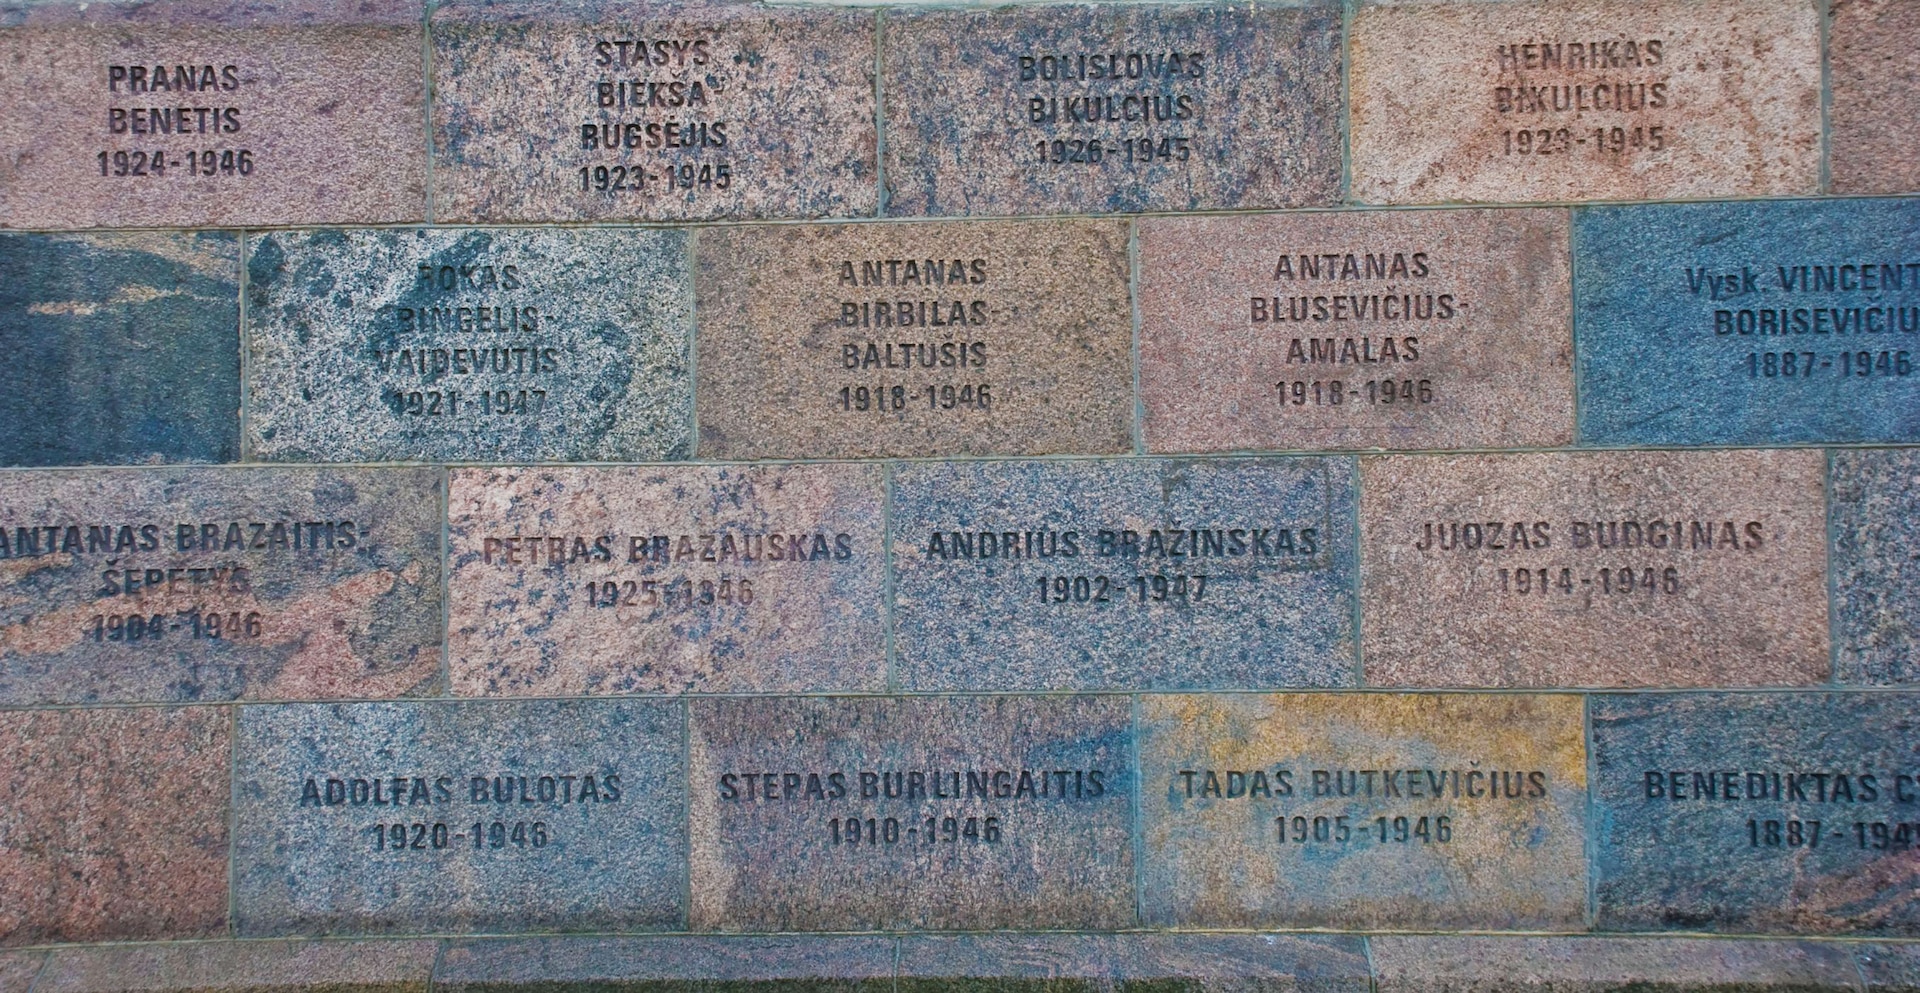 Wall of former KGB headquarters in Vilnius inscribed with names of those tortured and killed in its basement.
(Phillip Carter)